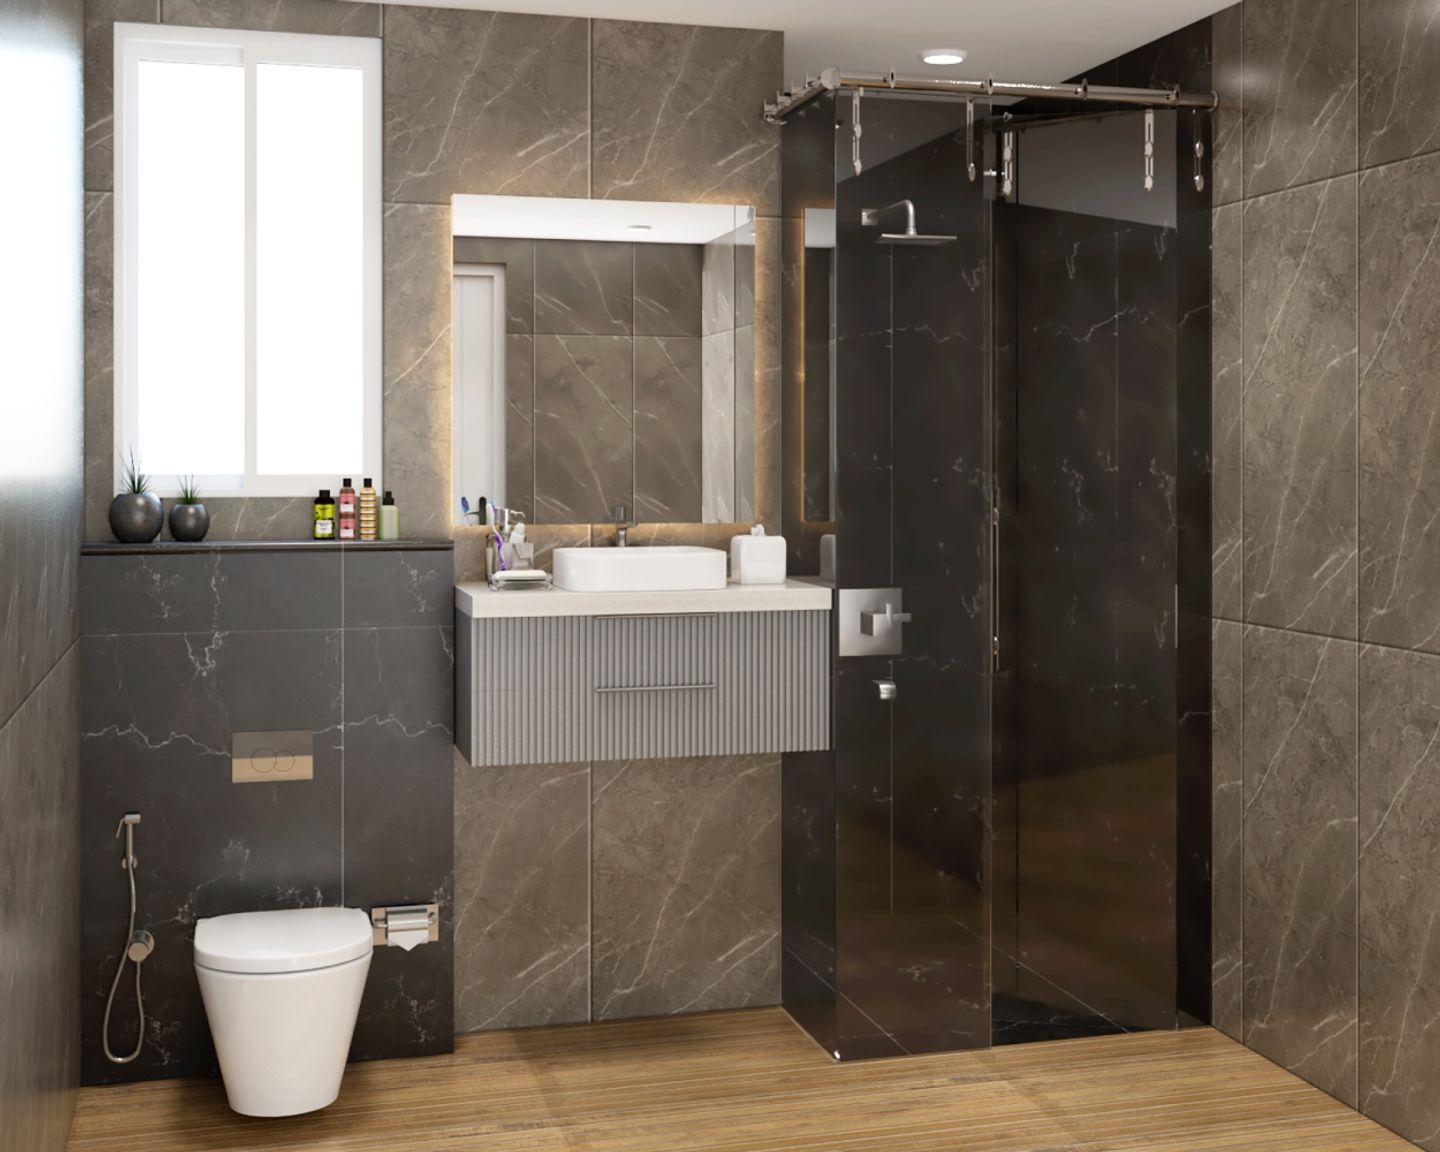 8X5 Ft Black And Brown Bathroom Design With Square Mirror - Livspace